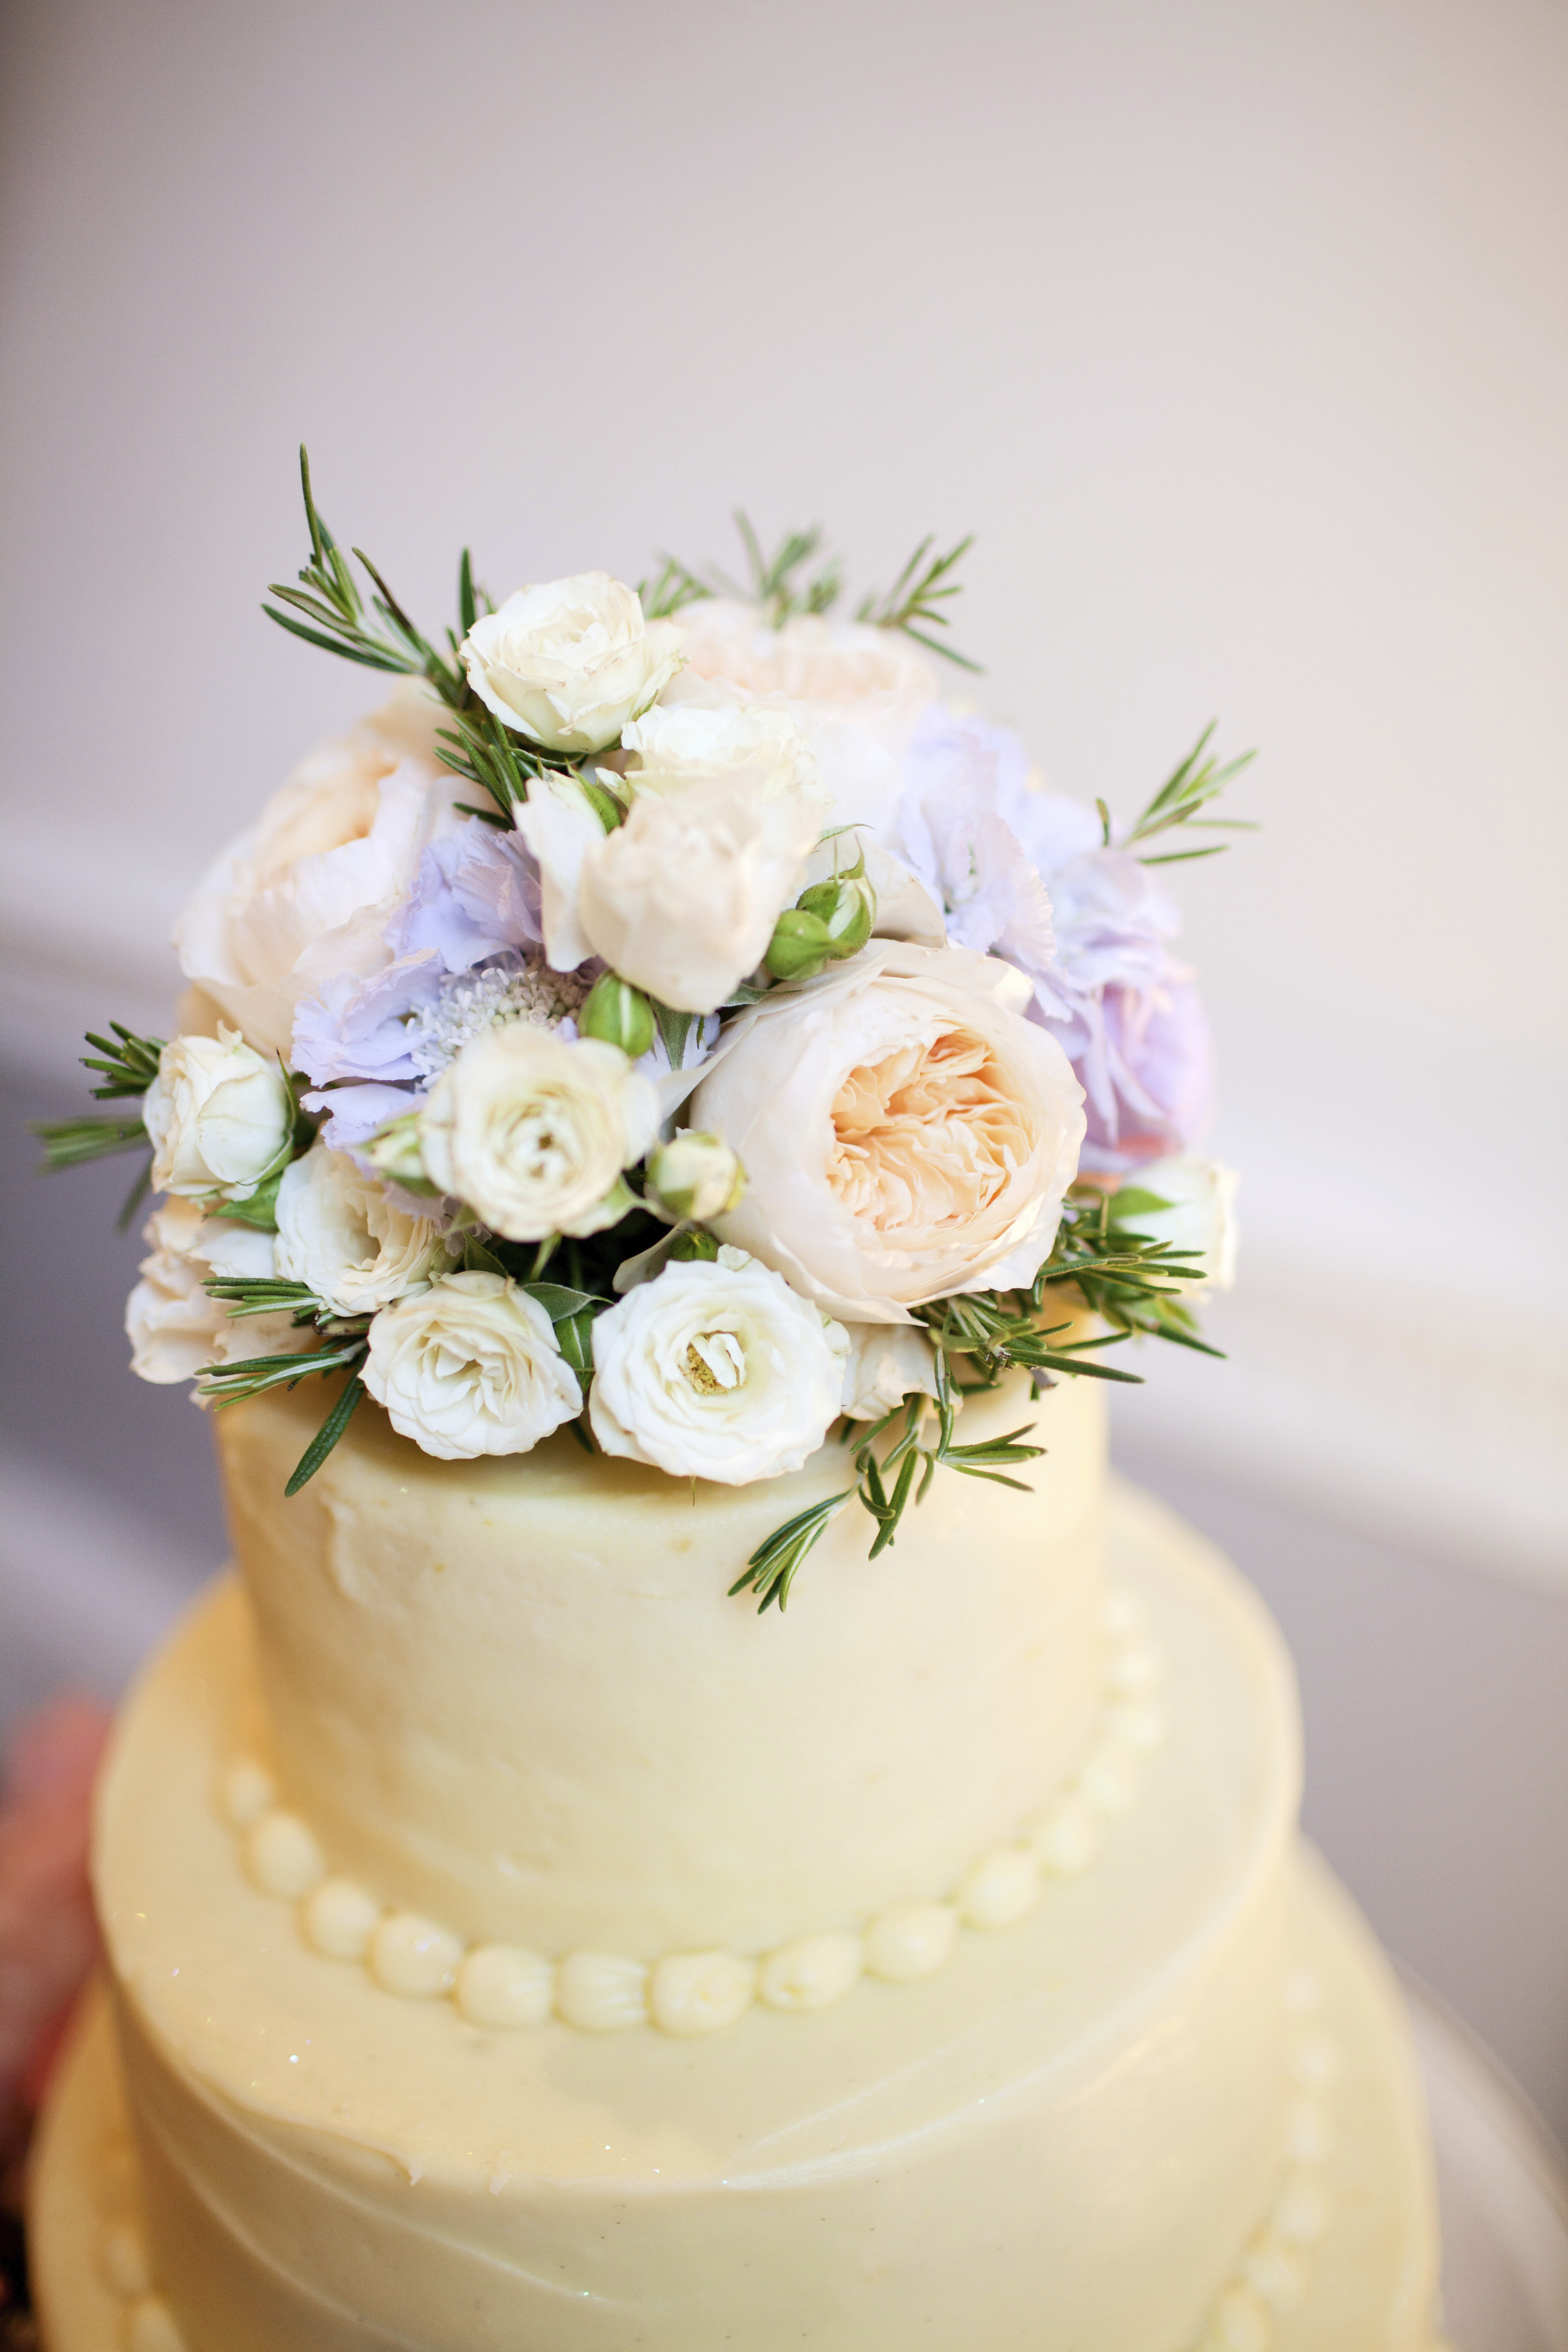 Wedding Cakes With Fresh Flowers
 Best Ways to Use Fresh Flowers on your Wedding Cake